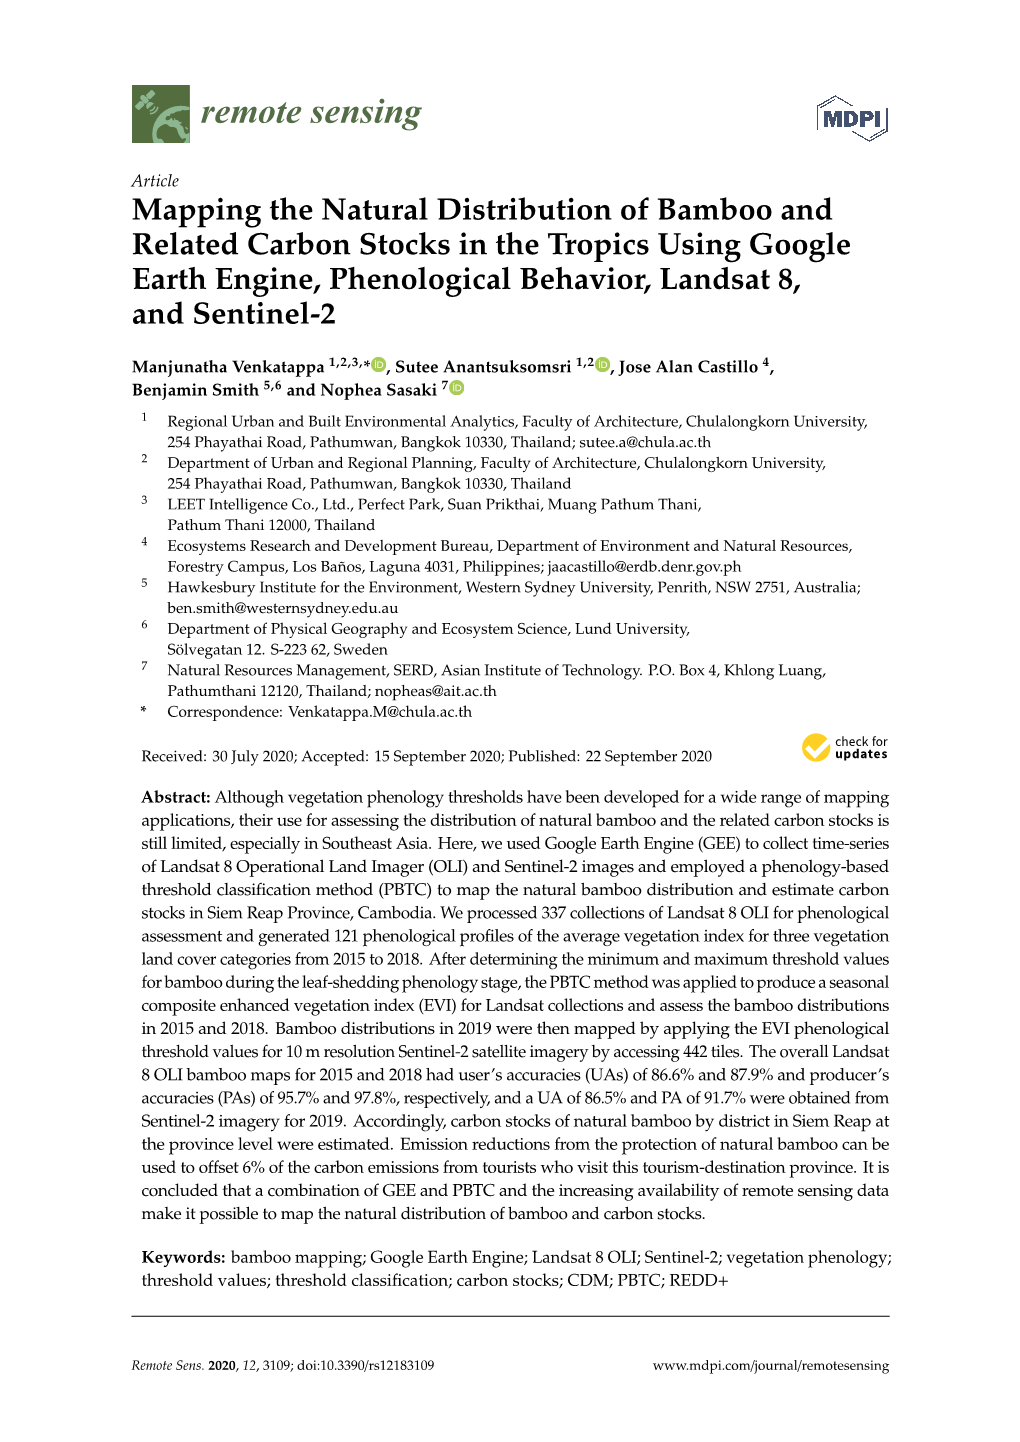 Mapping the Natural Distribution of Bamboo and Related Carbon Stocks in the Tropics Using Google Earth Engine, Phenological Behavior, Landsat 8, and Sentinel-2